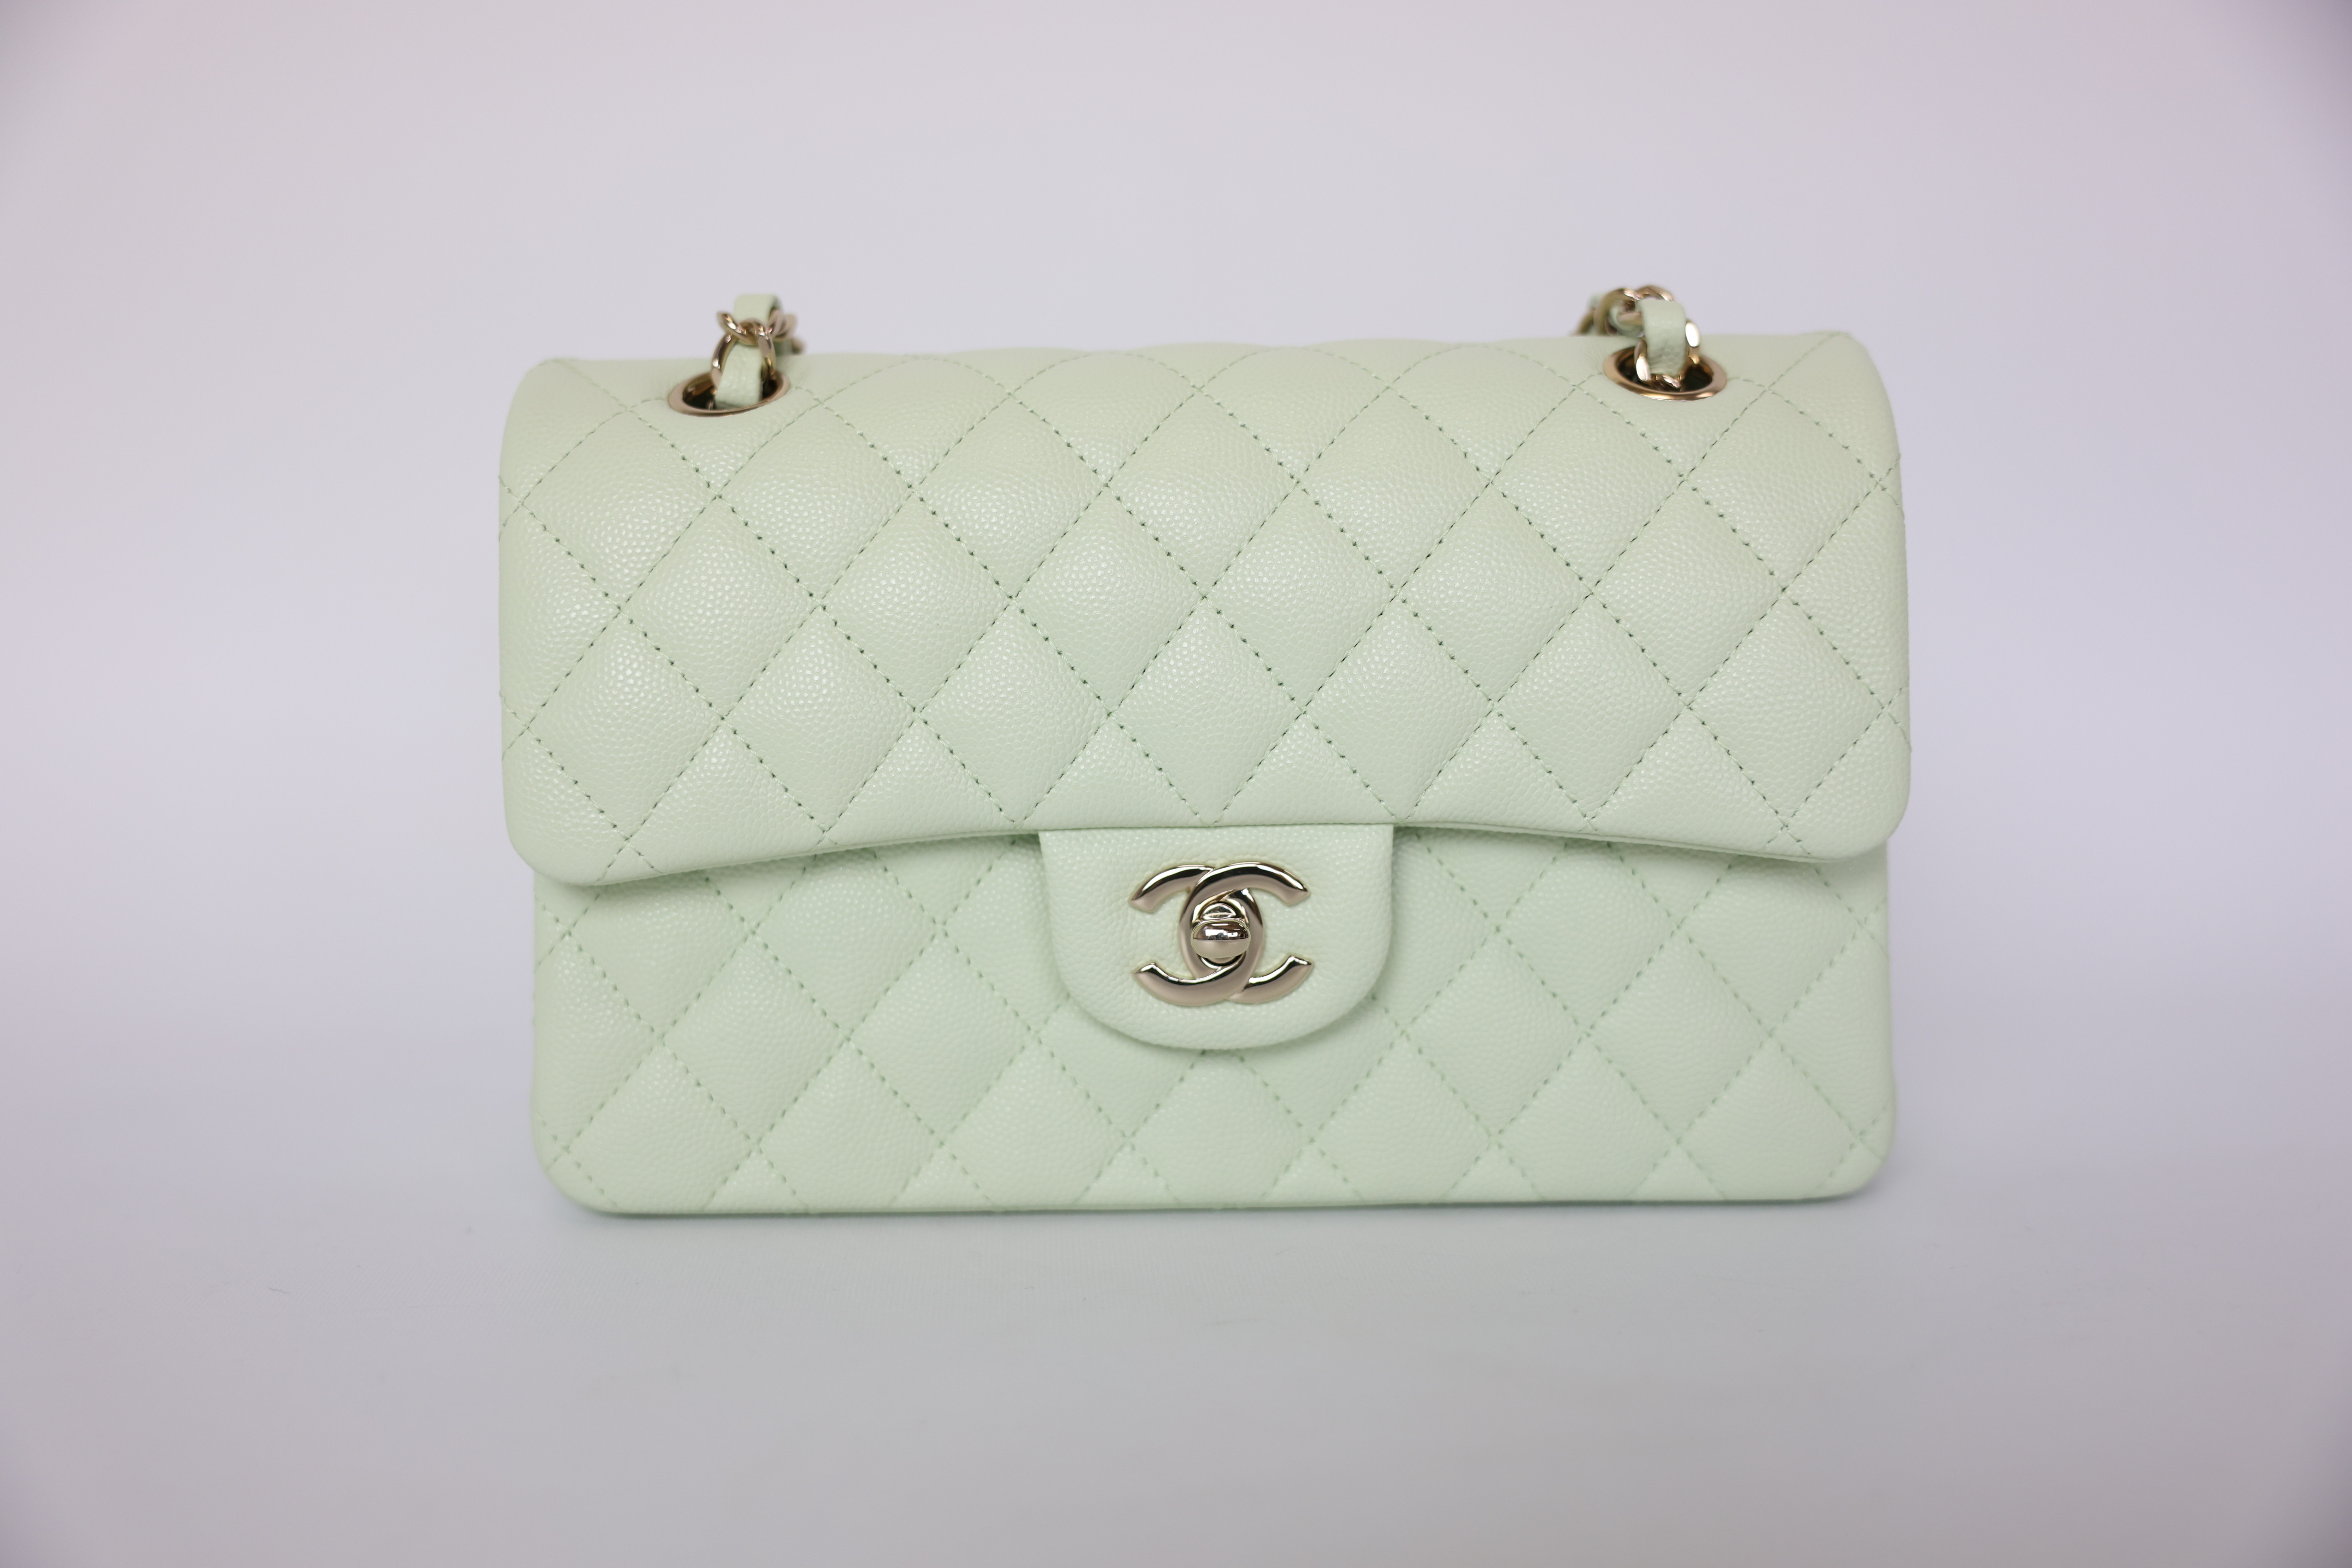 Chanel Small Classic Flap Handbag, Light Green Caviar Leather With Gold  Hardware, Preowned In Box, WA001